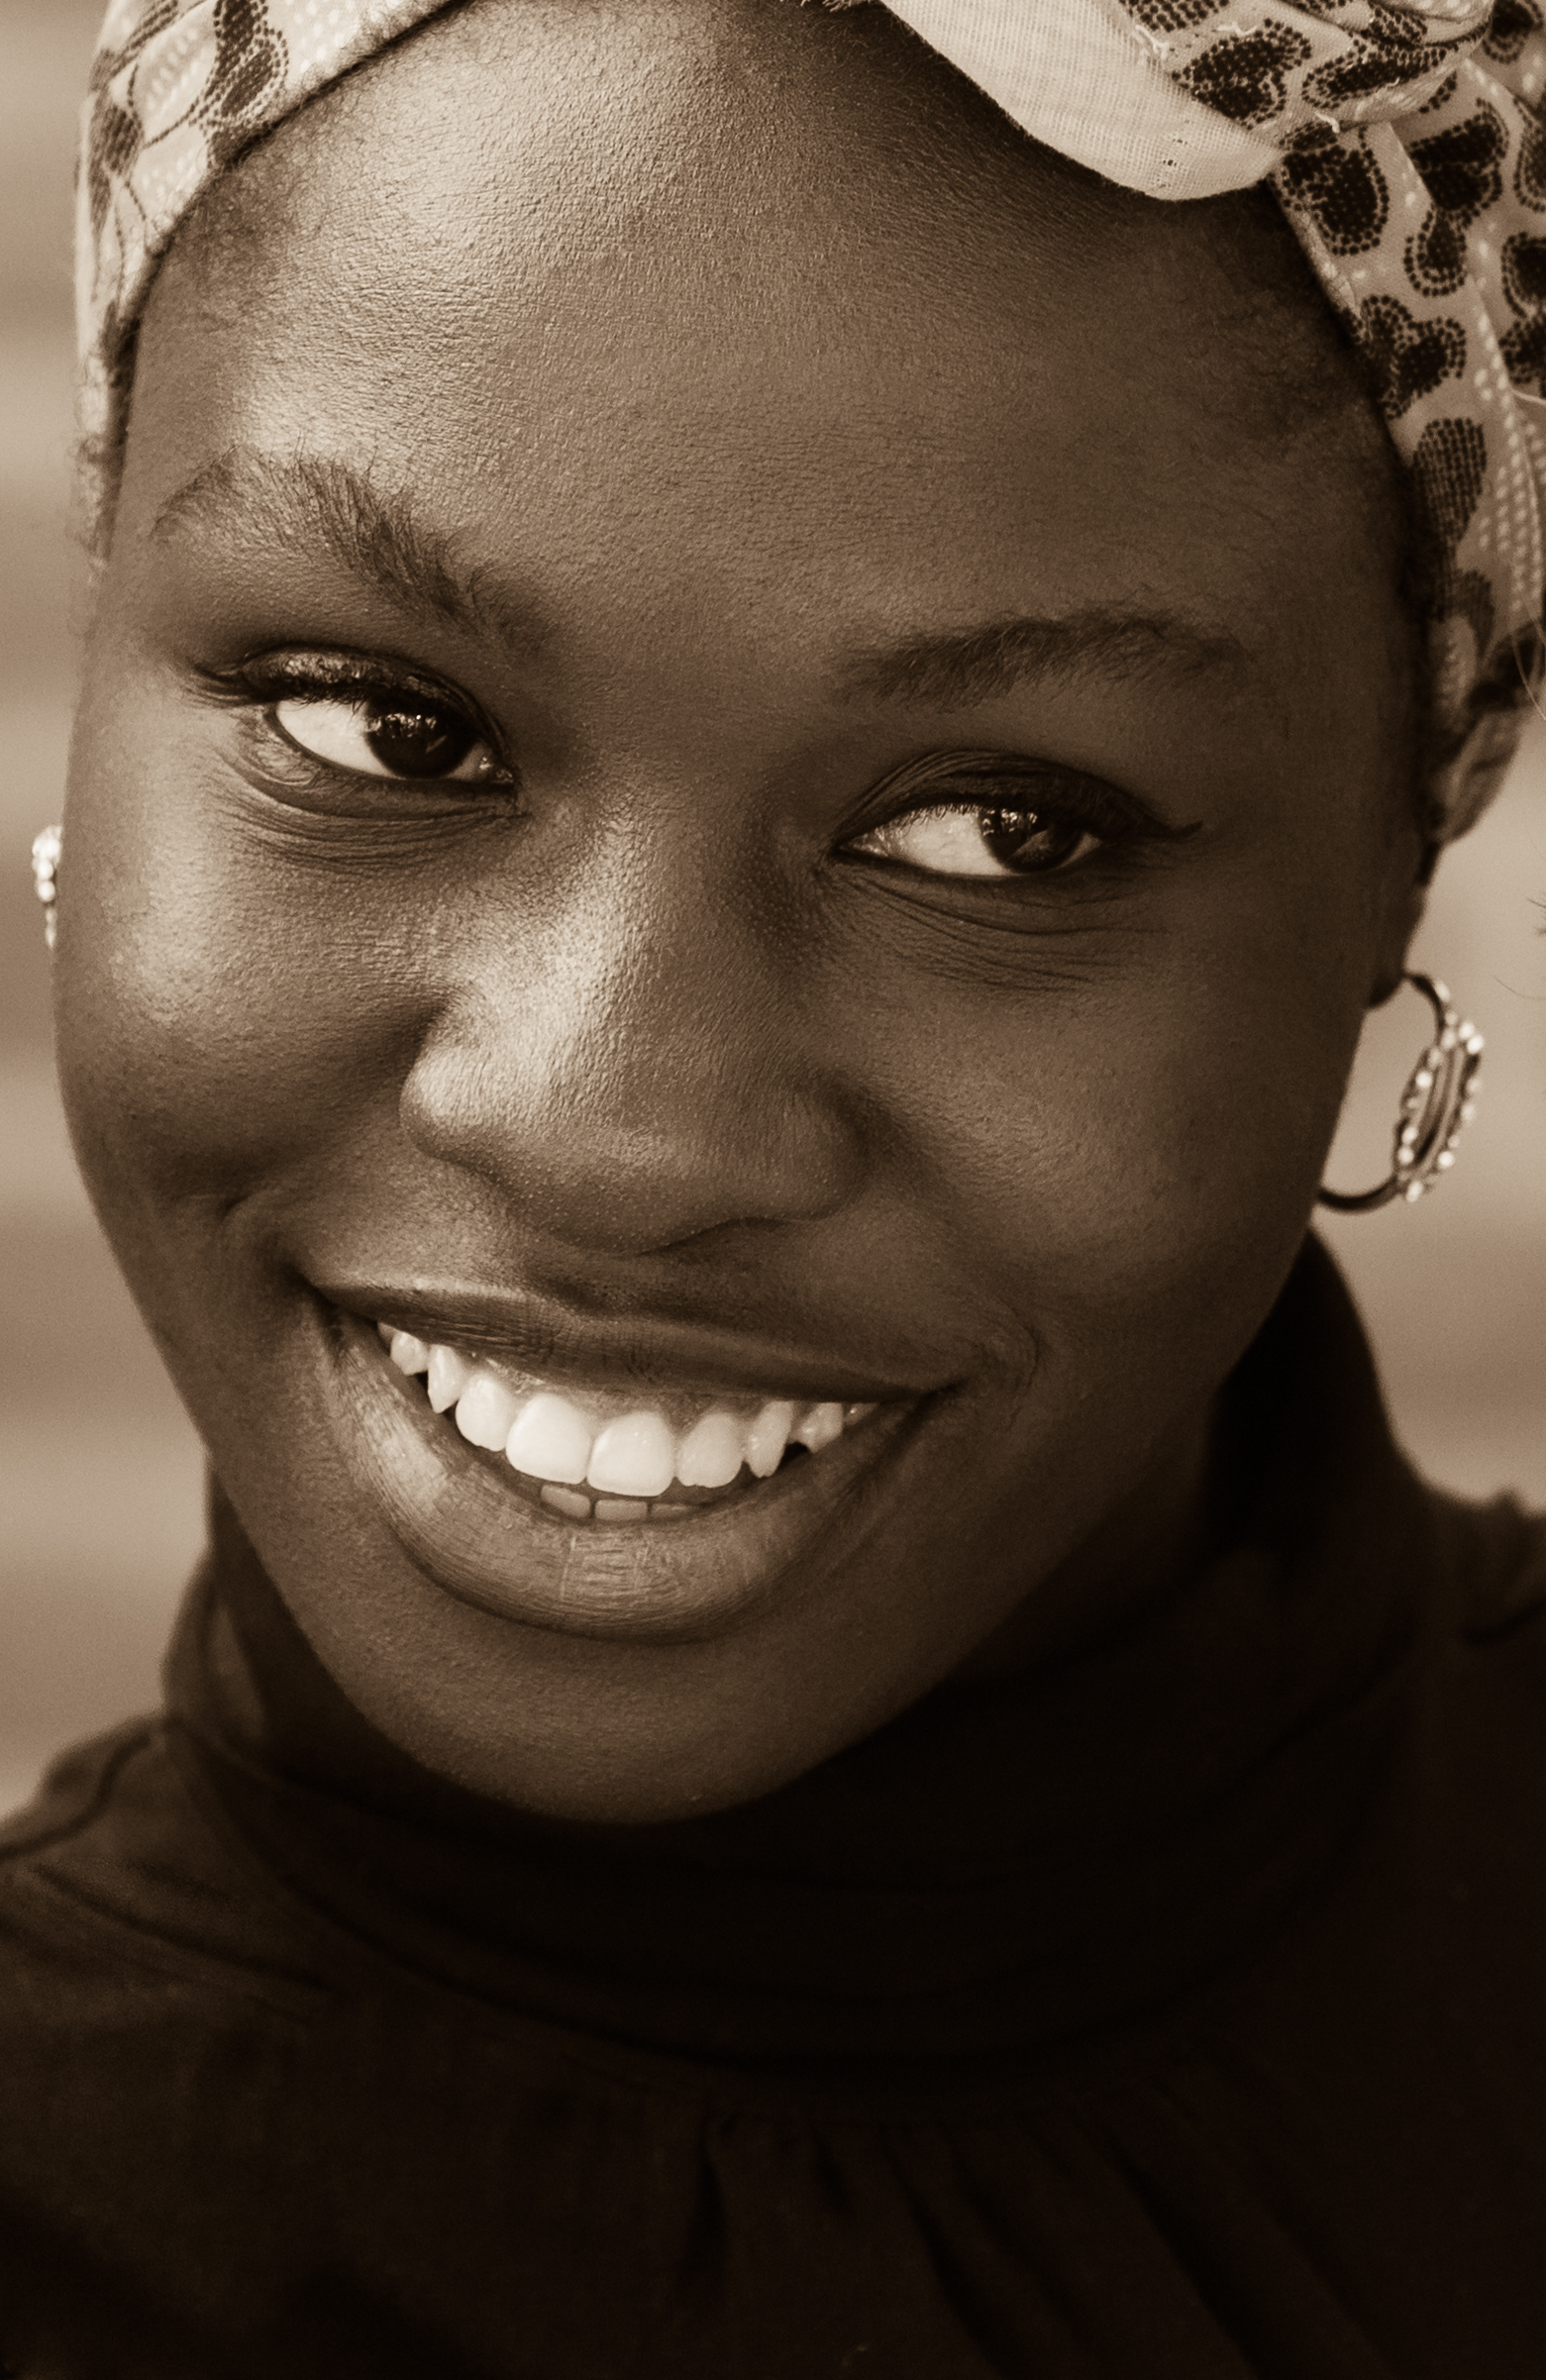 a Catholic Nigerian girl photographed in September 2014, picture 2, black and white